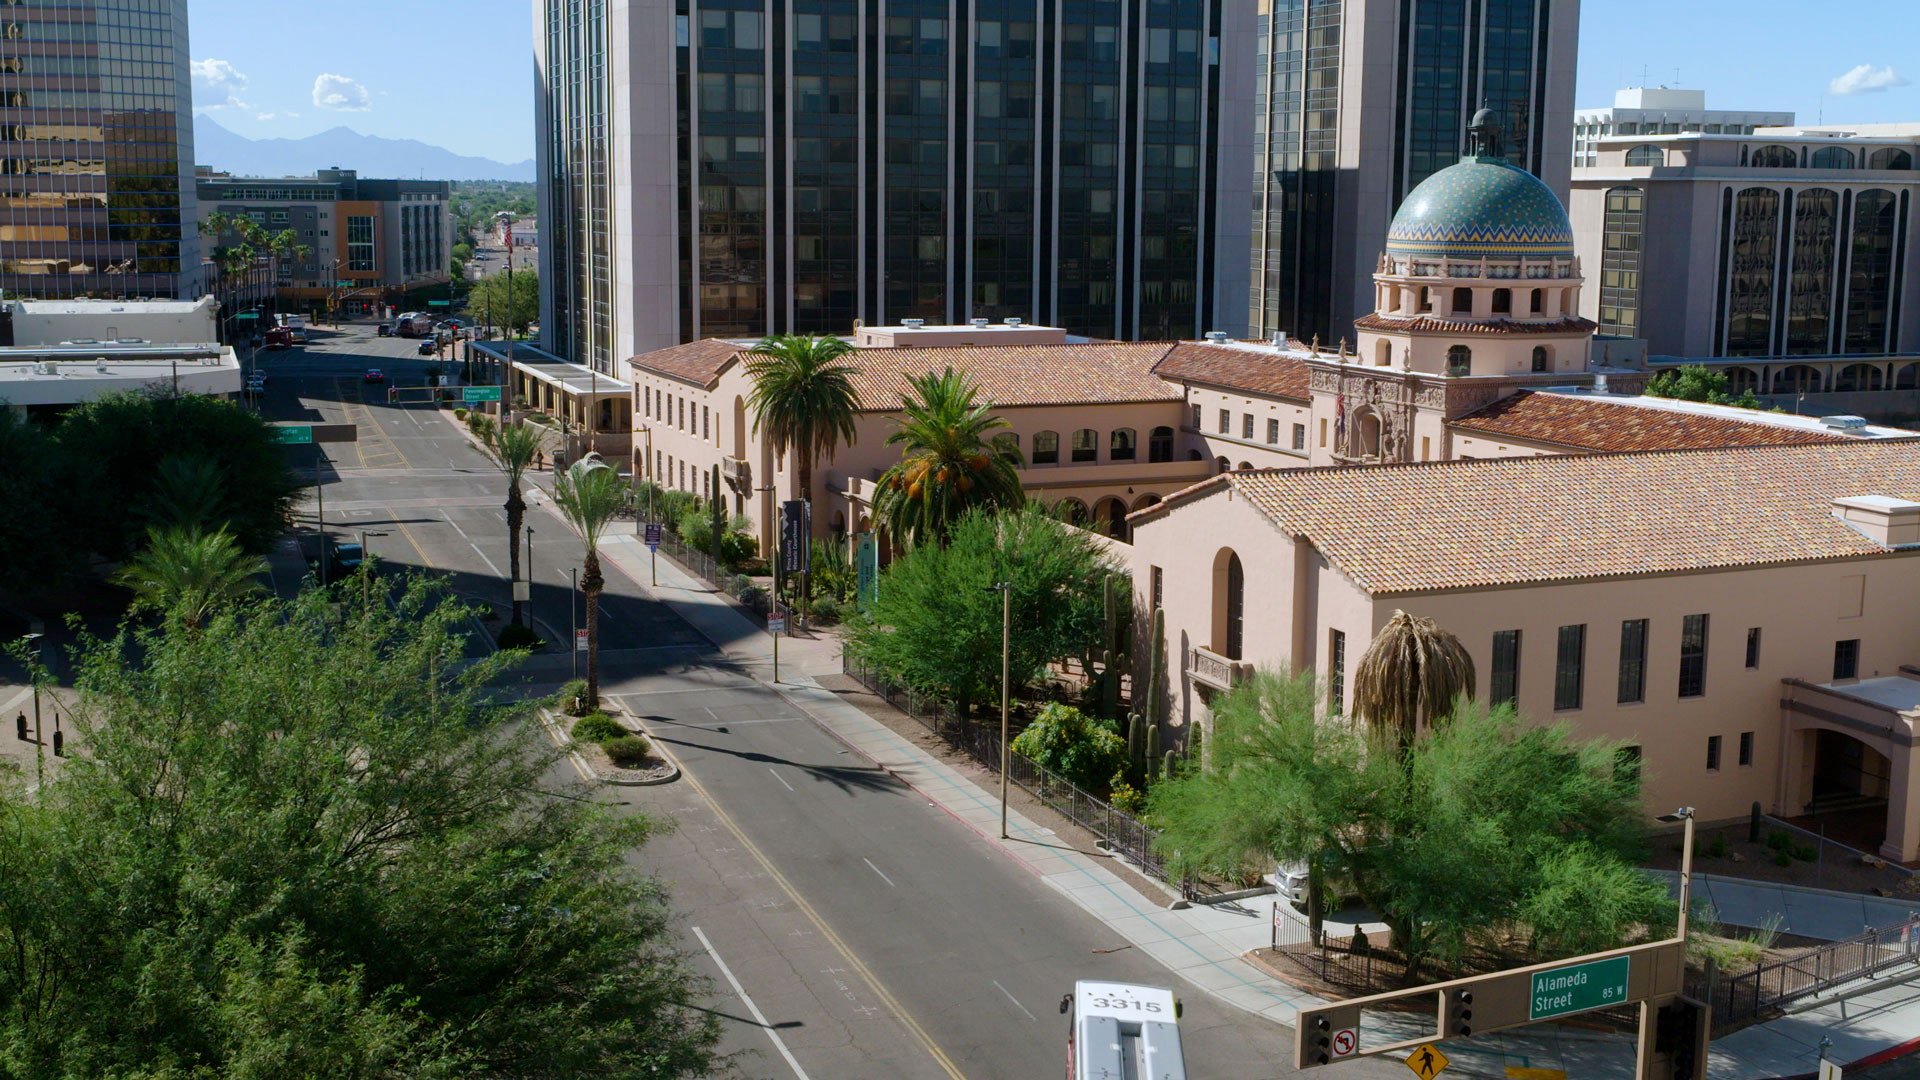 Favorite Places: Pima County Historic Courthouse